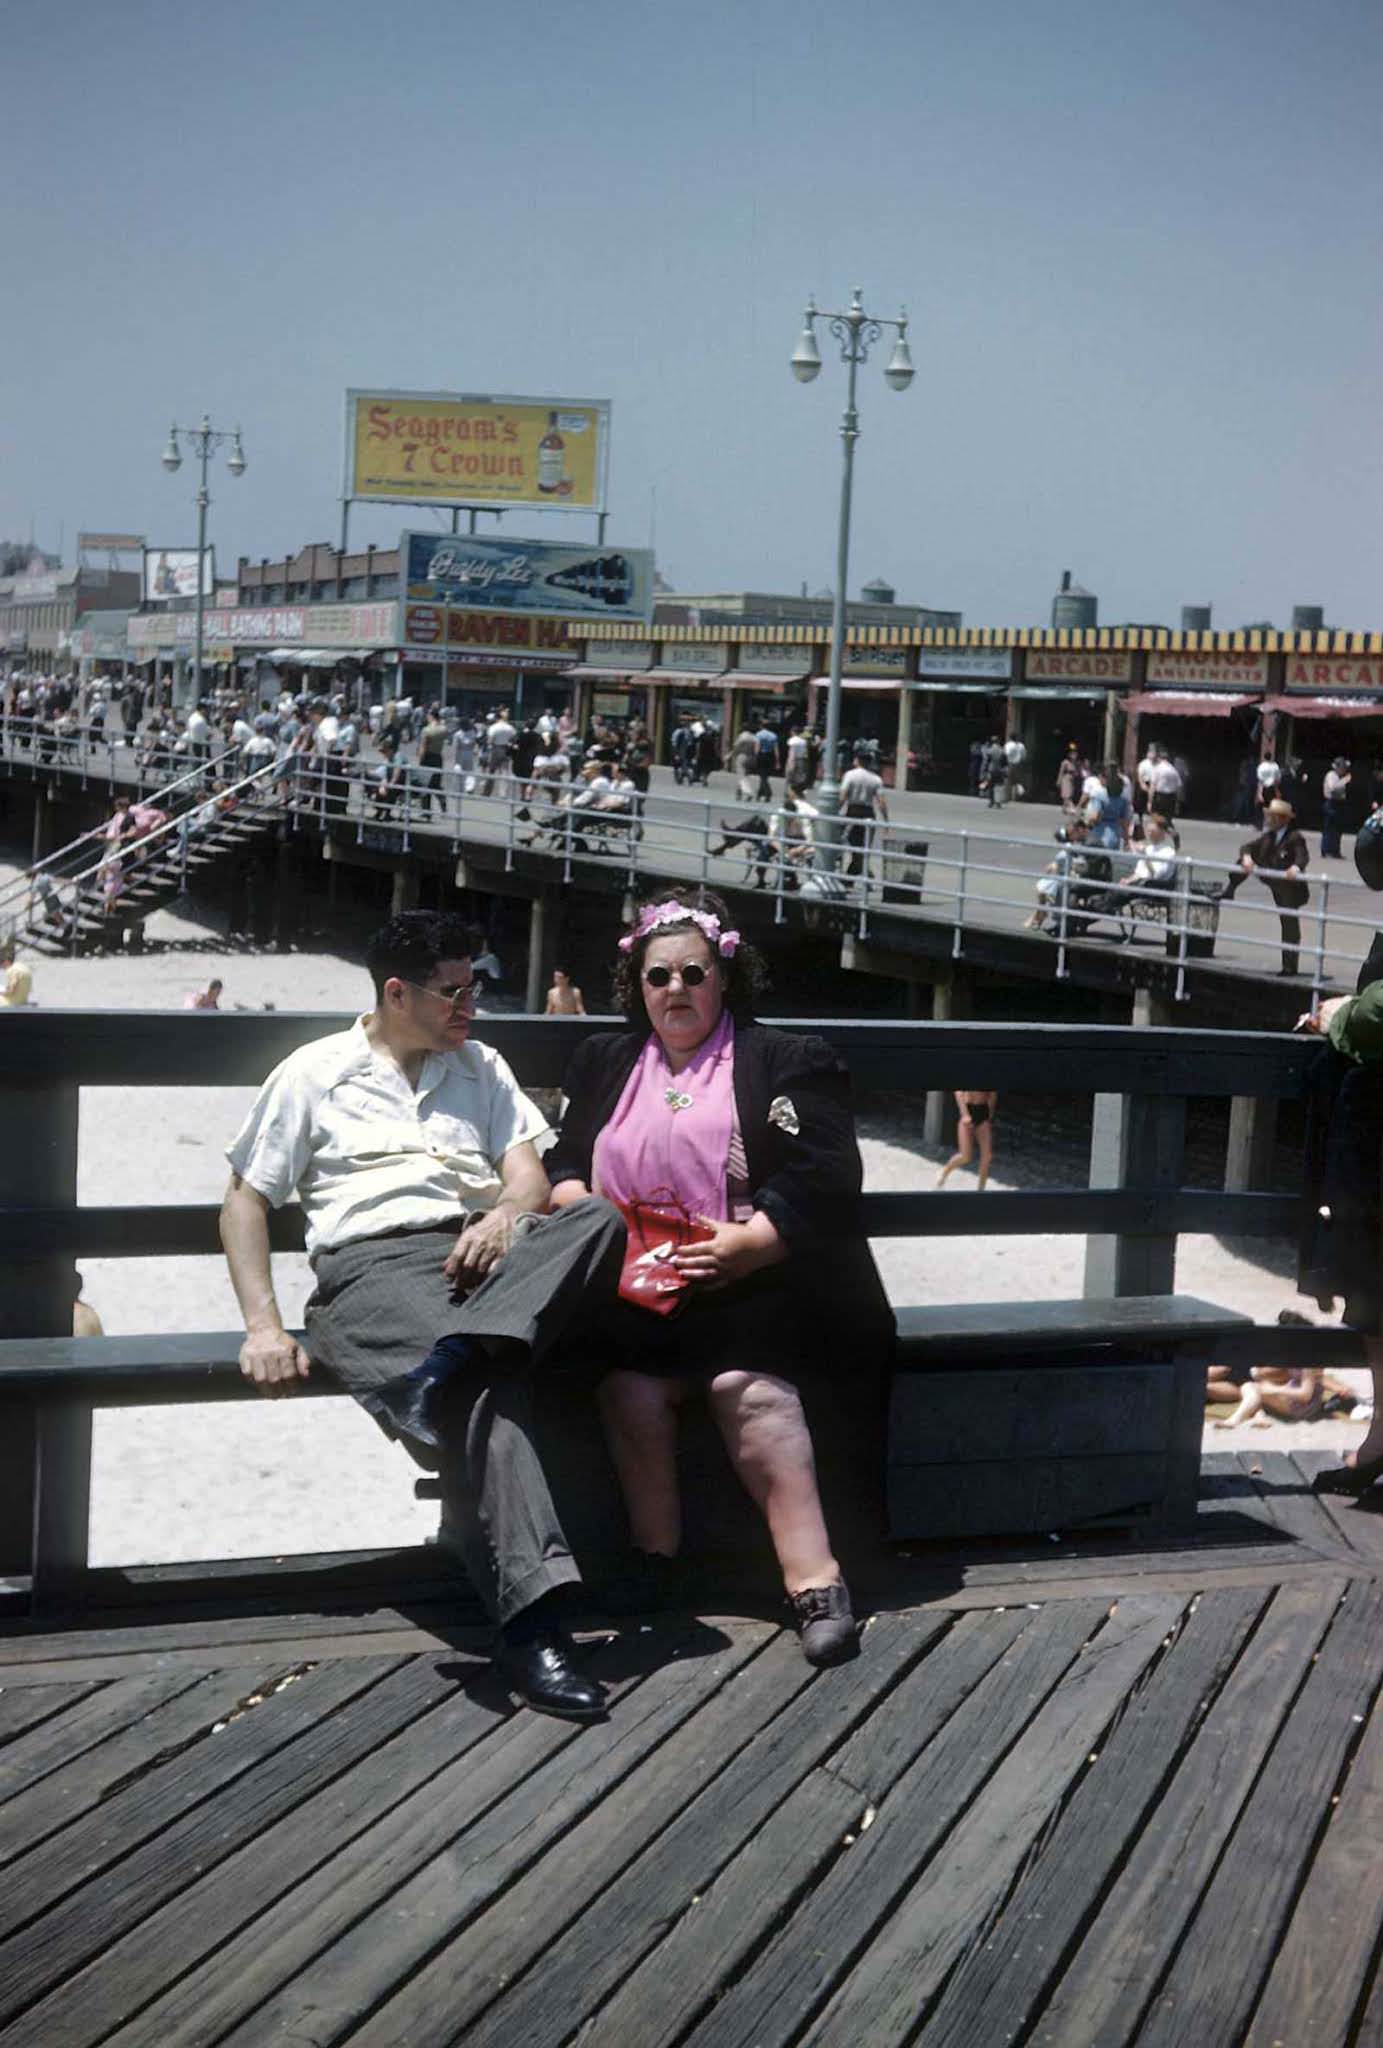 A view of the Coney Island Boardwalk.